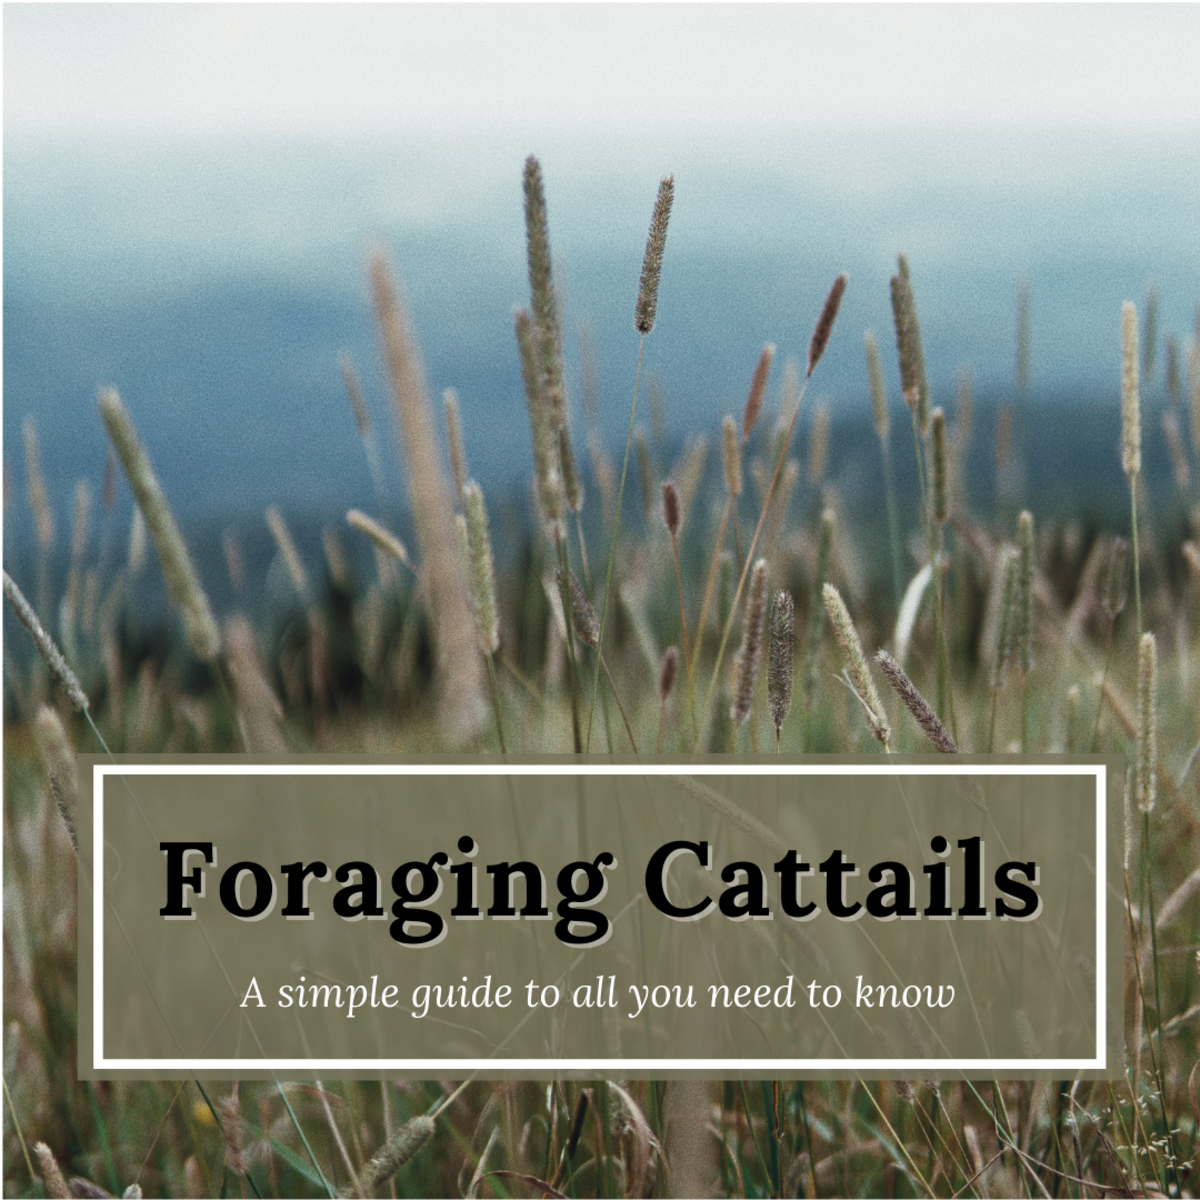 This article will break down all the basics you need to know to forage and prepare wild cattails.